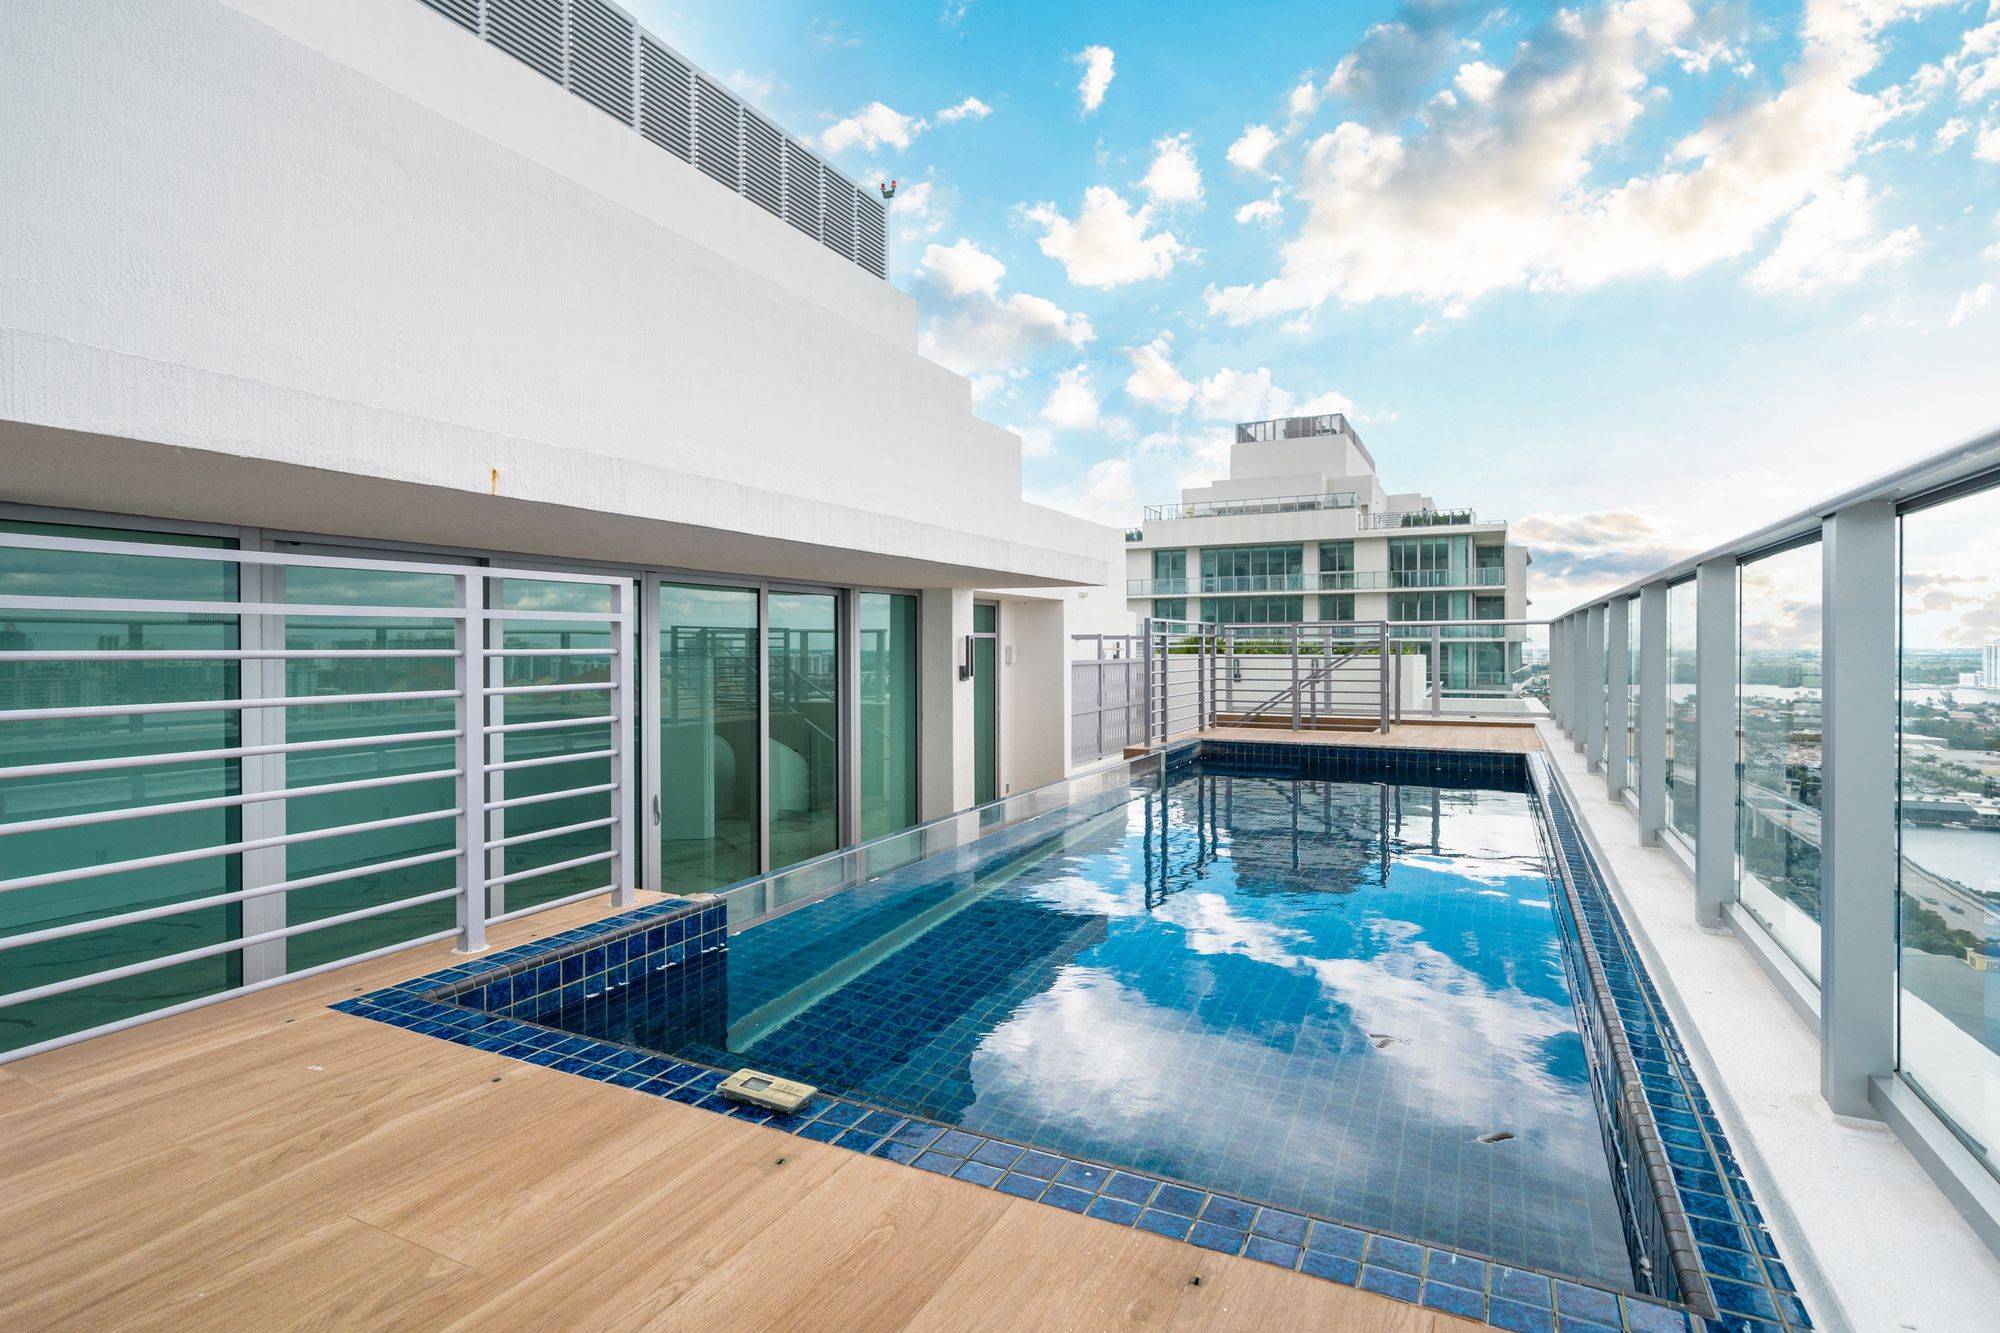 Sunny Isles 5-Bedrrom, 5.5-Bathroom 2-Floor Penthouse with Private Glass Pool, Oversized Wrap-Around Terrace and Water Views | The Ultimate Miami Beach Lifestyle